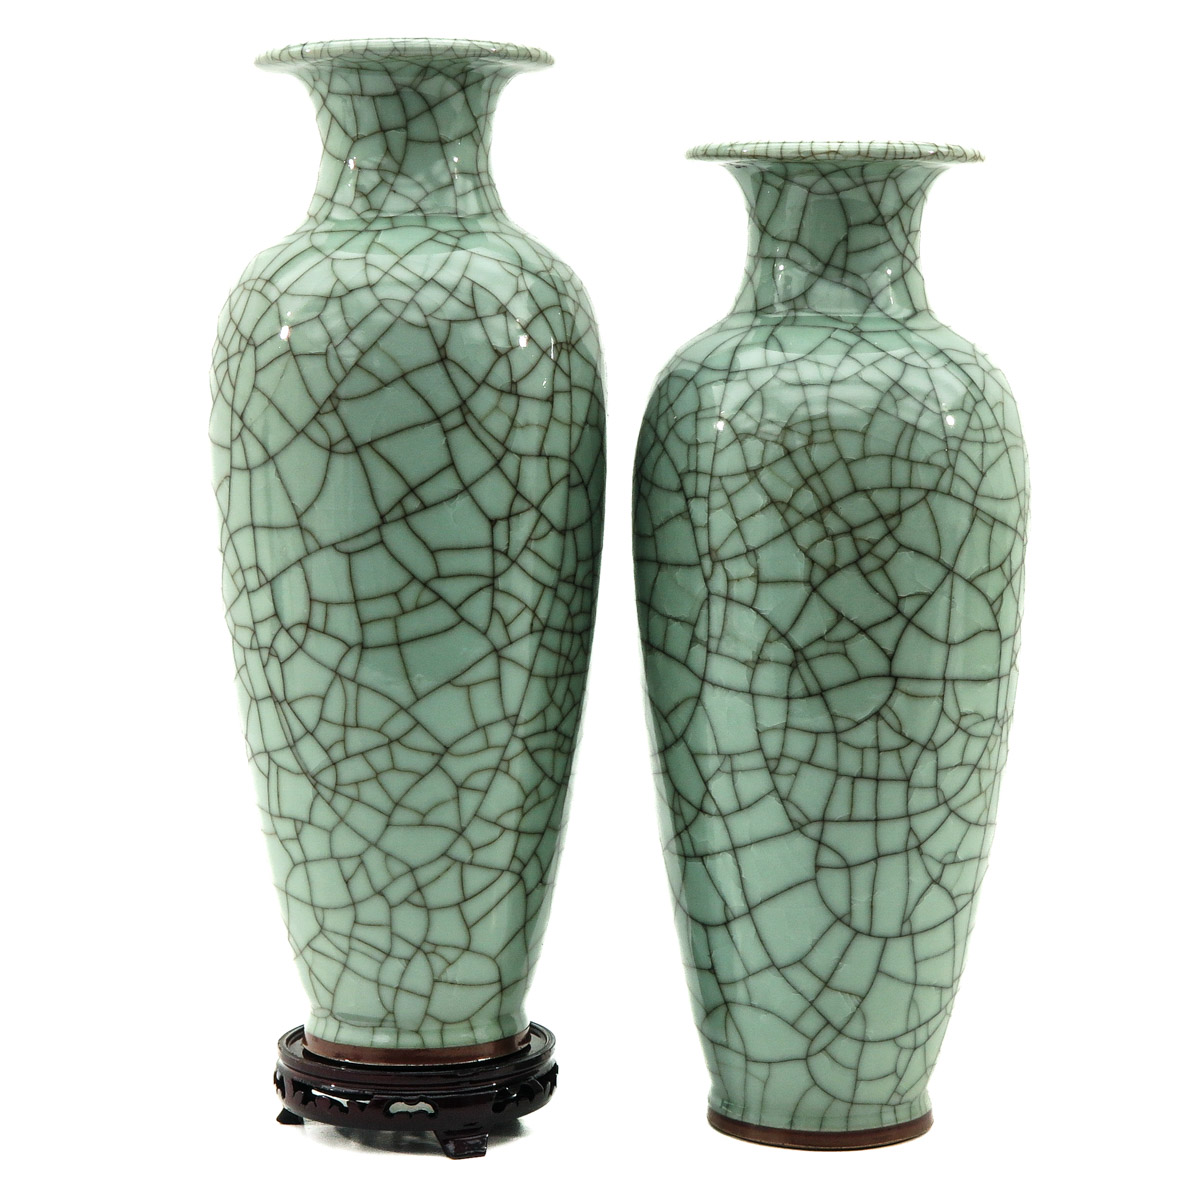 A Pair of Jun Ware Vases - Image 3 of 6